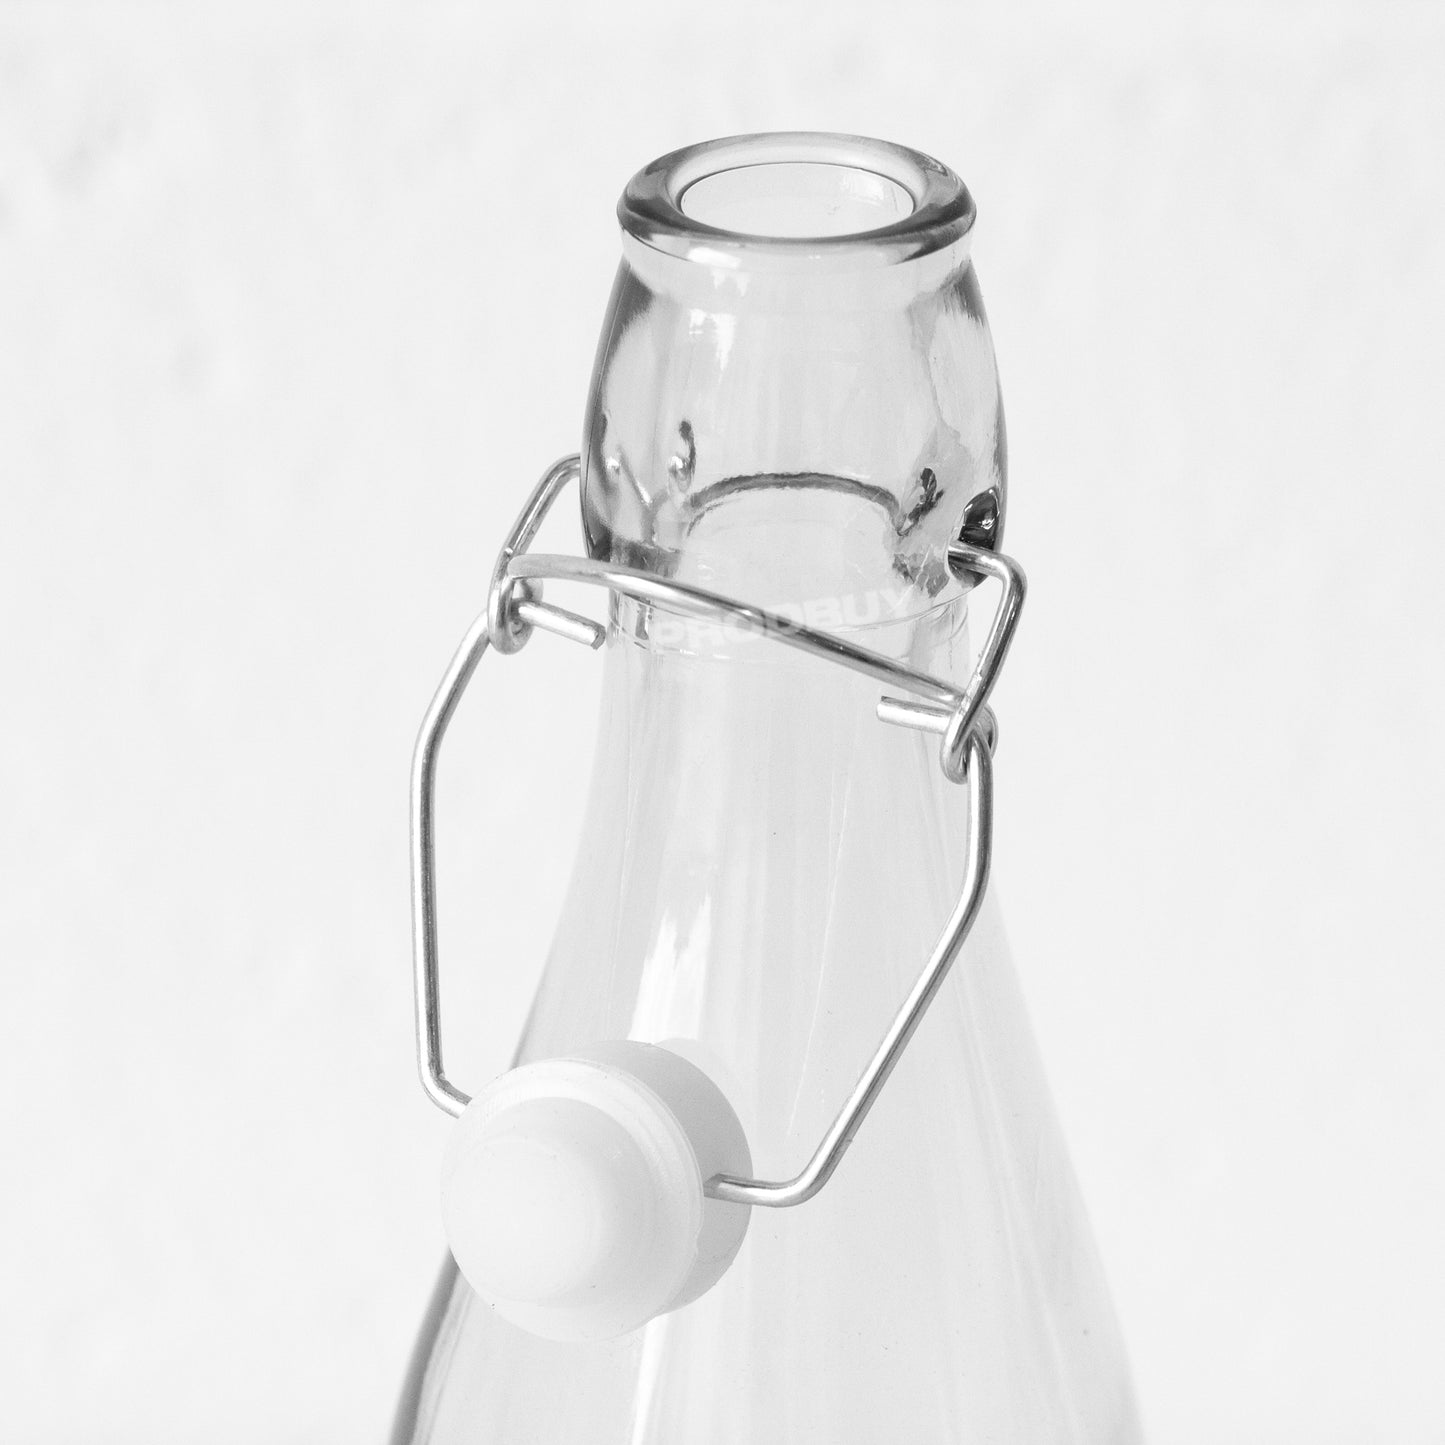 Set of 2 One Litre Glass Preserve Bottles with Clip Top Lids